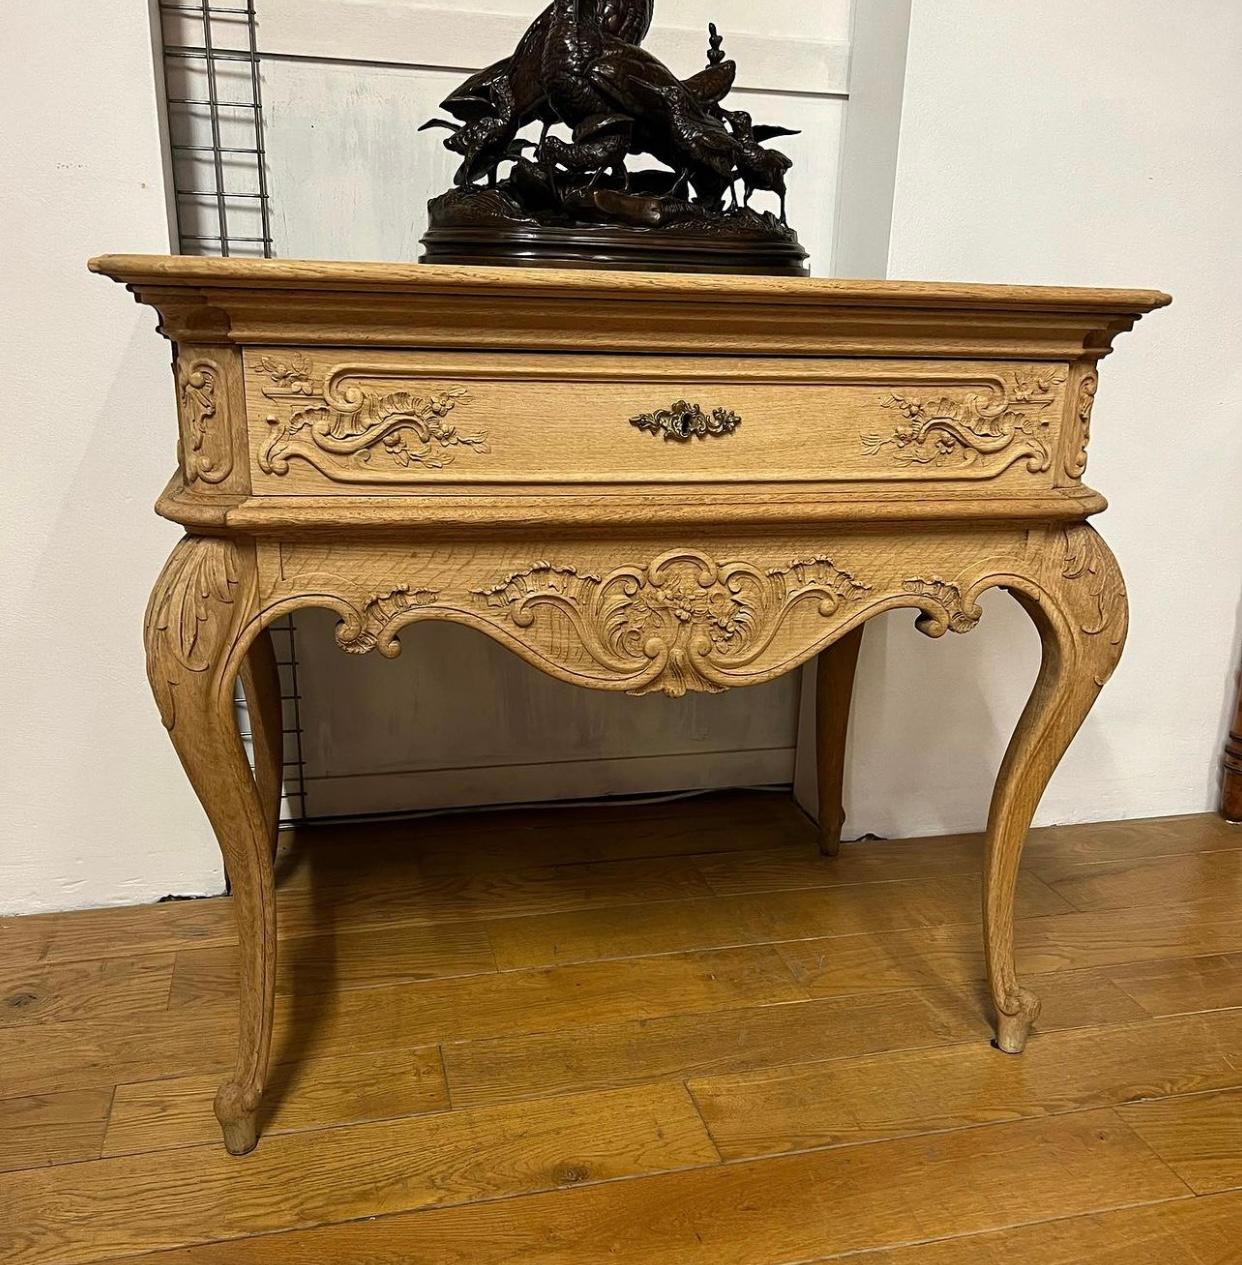 A delightful Solid Oak Side or Lamp Table, having a single drawer to the front, lovely carved decoration and elegant legs. We have bleached it for a light look and in excellent original condition for the home.
Height 78 cm
Width 90 cm
Depth 60 cm